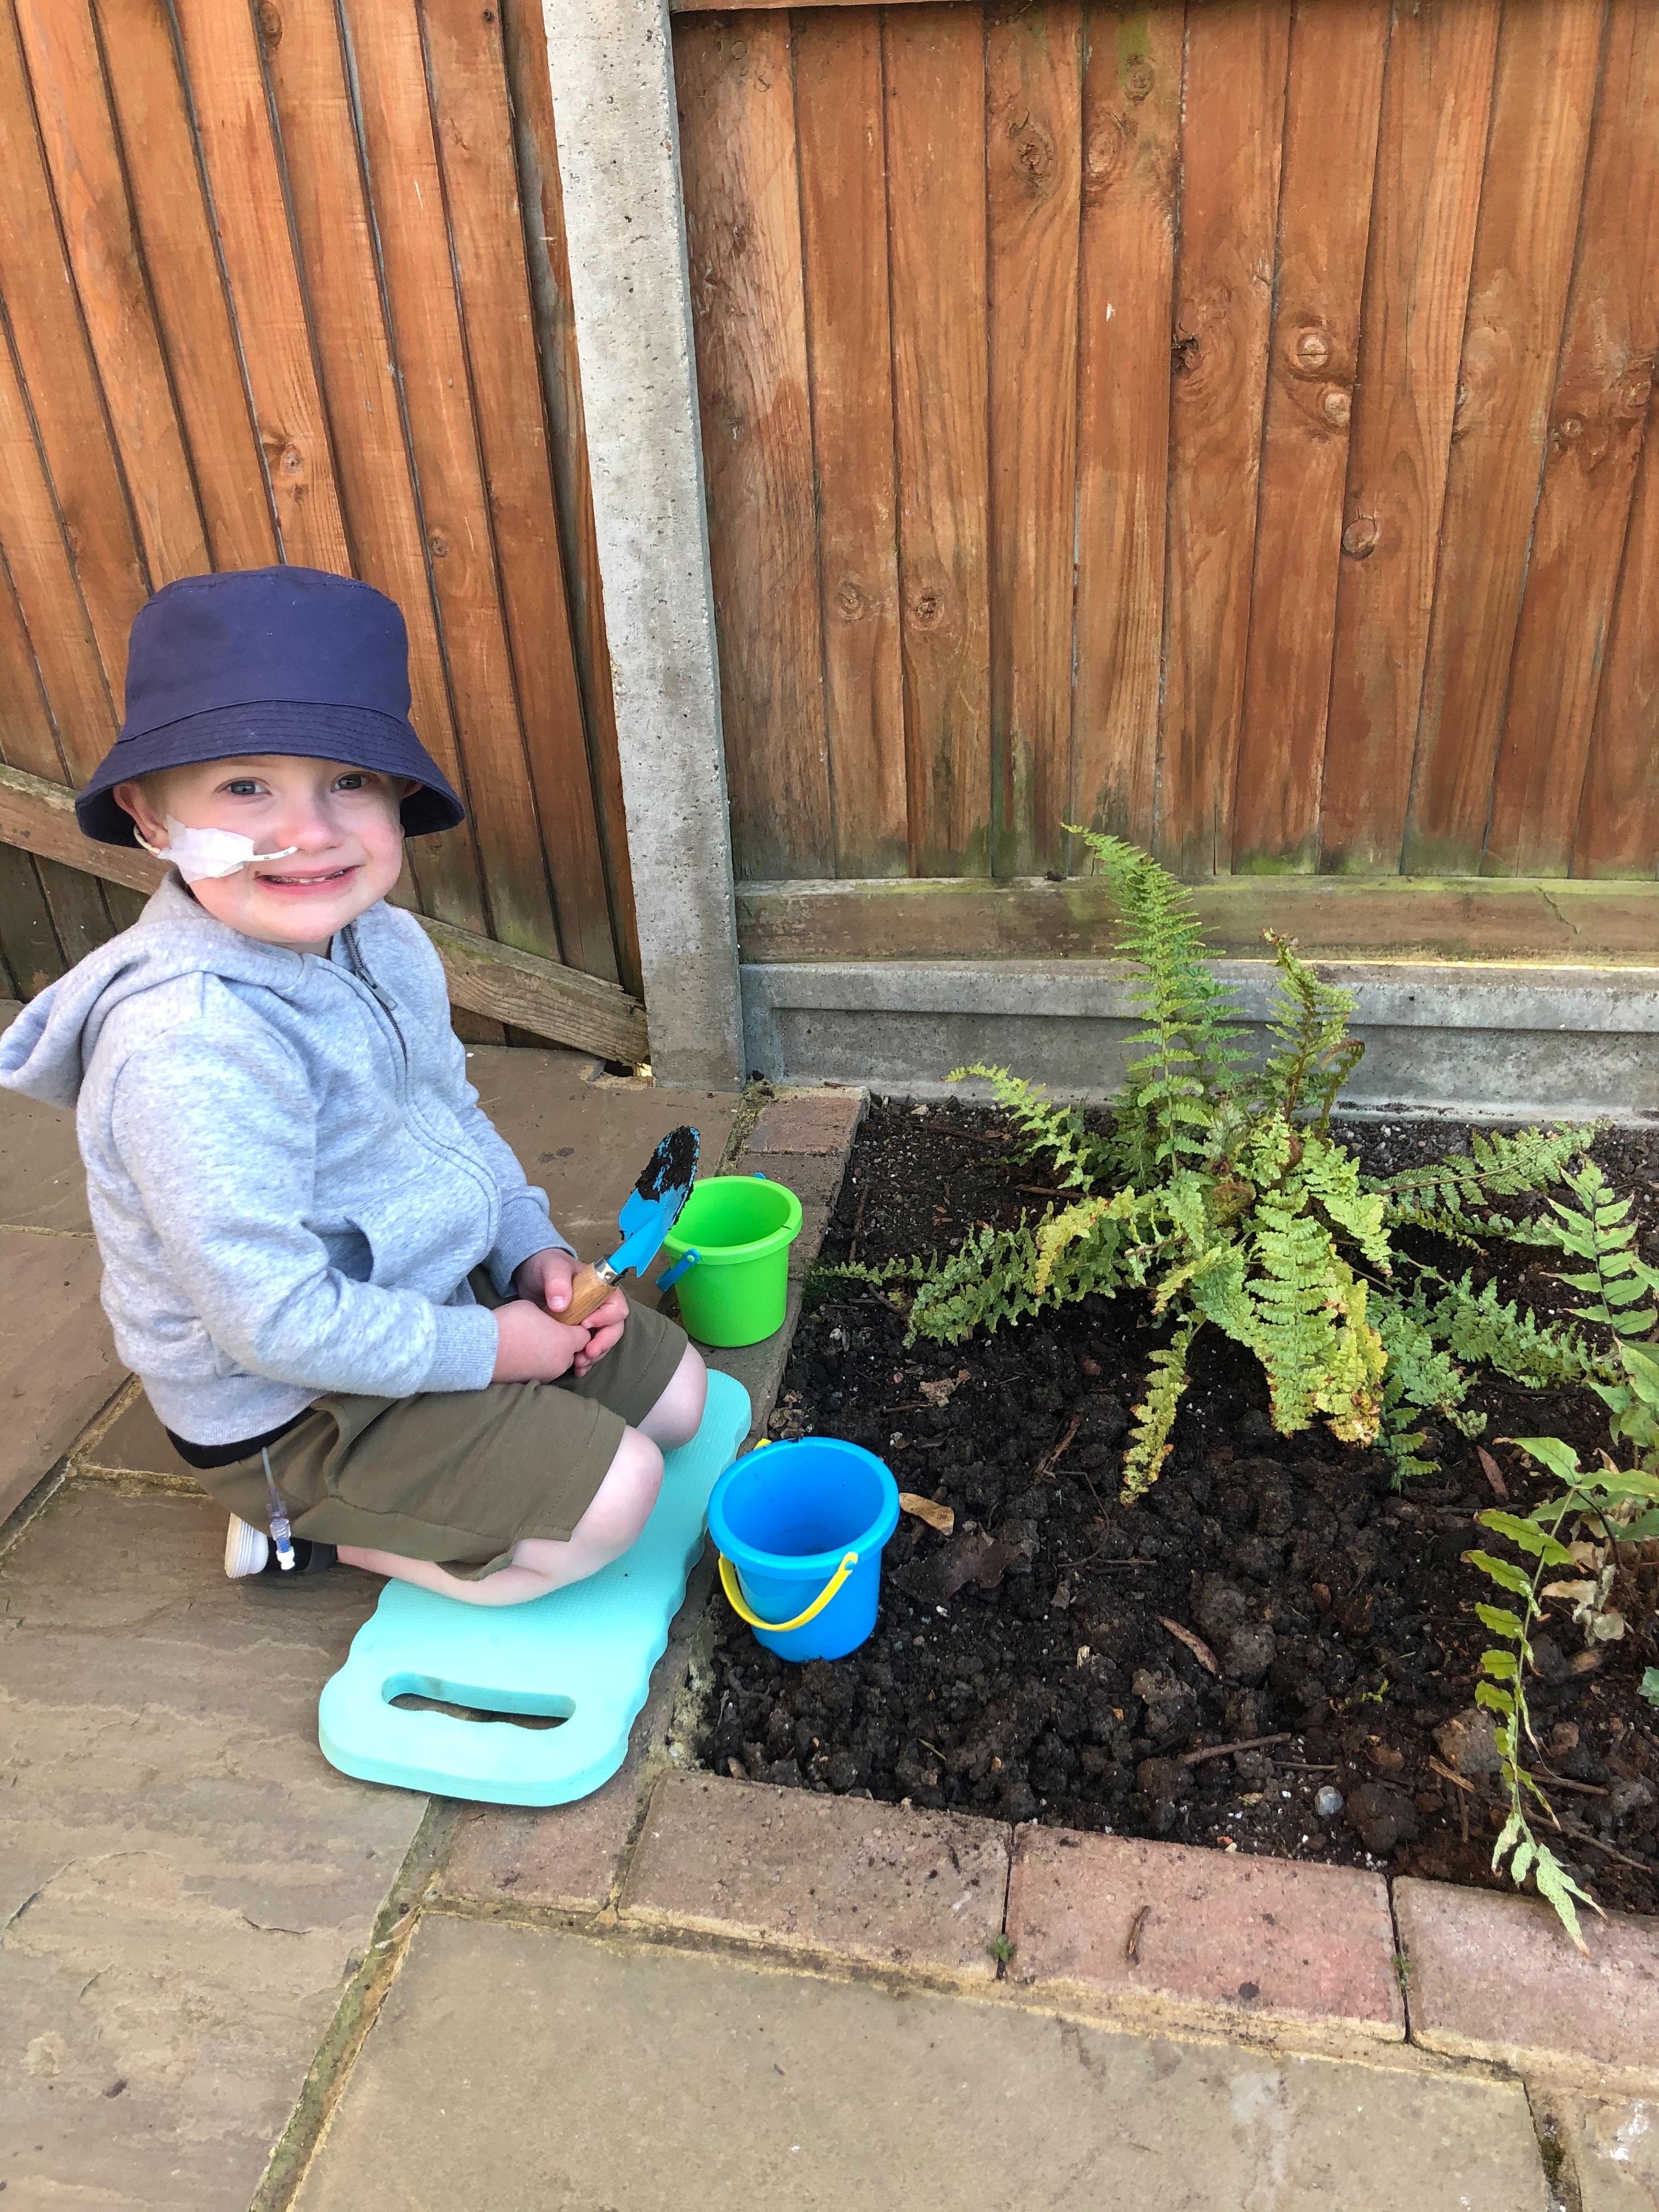 Alfie knelling next to a patch of garden, with a spade in hand, bucket next to him  and a fern in the ground